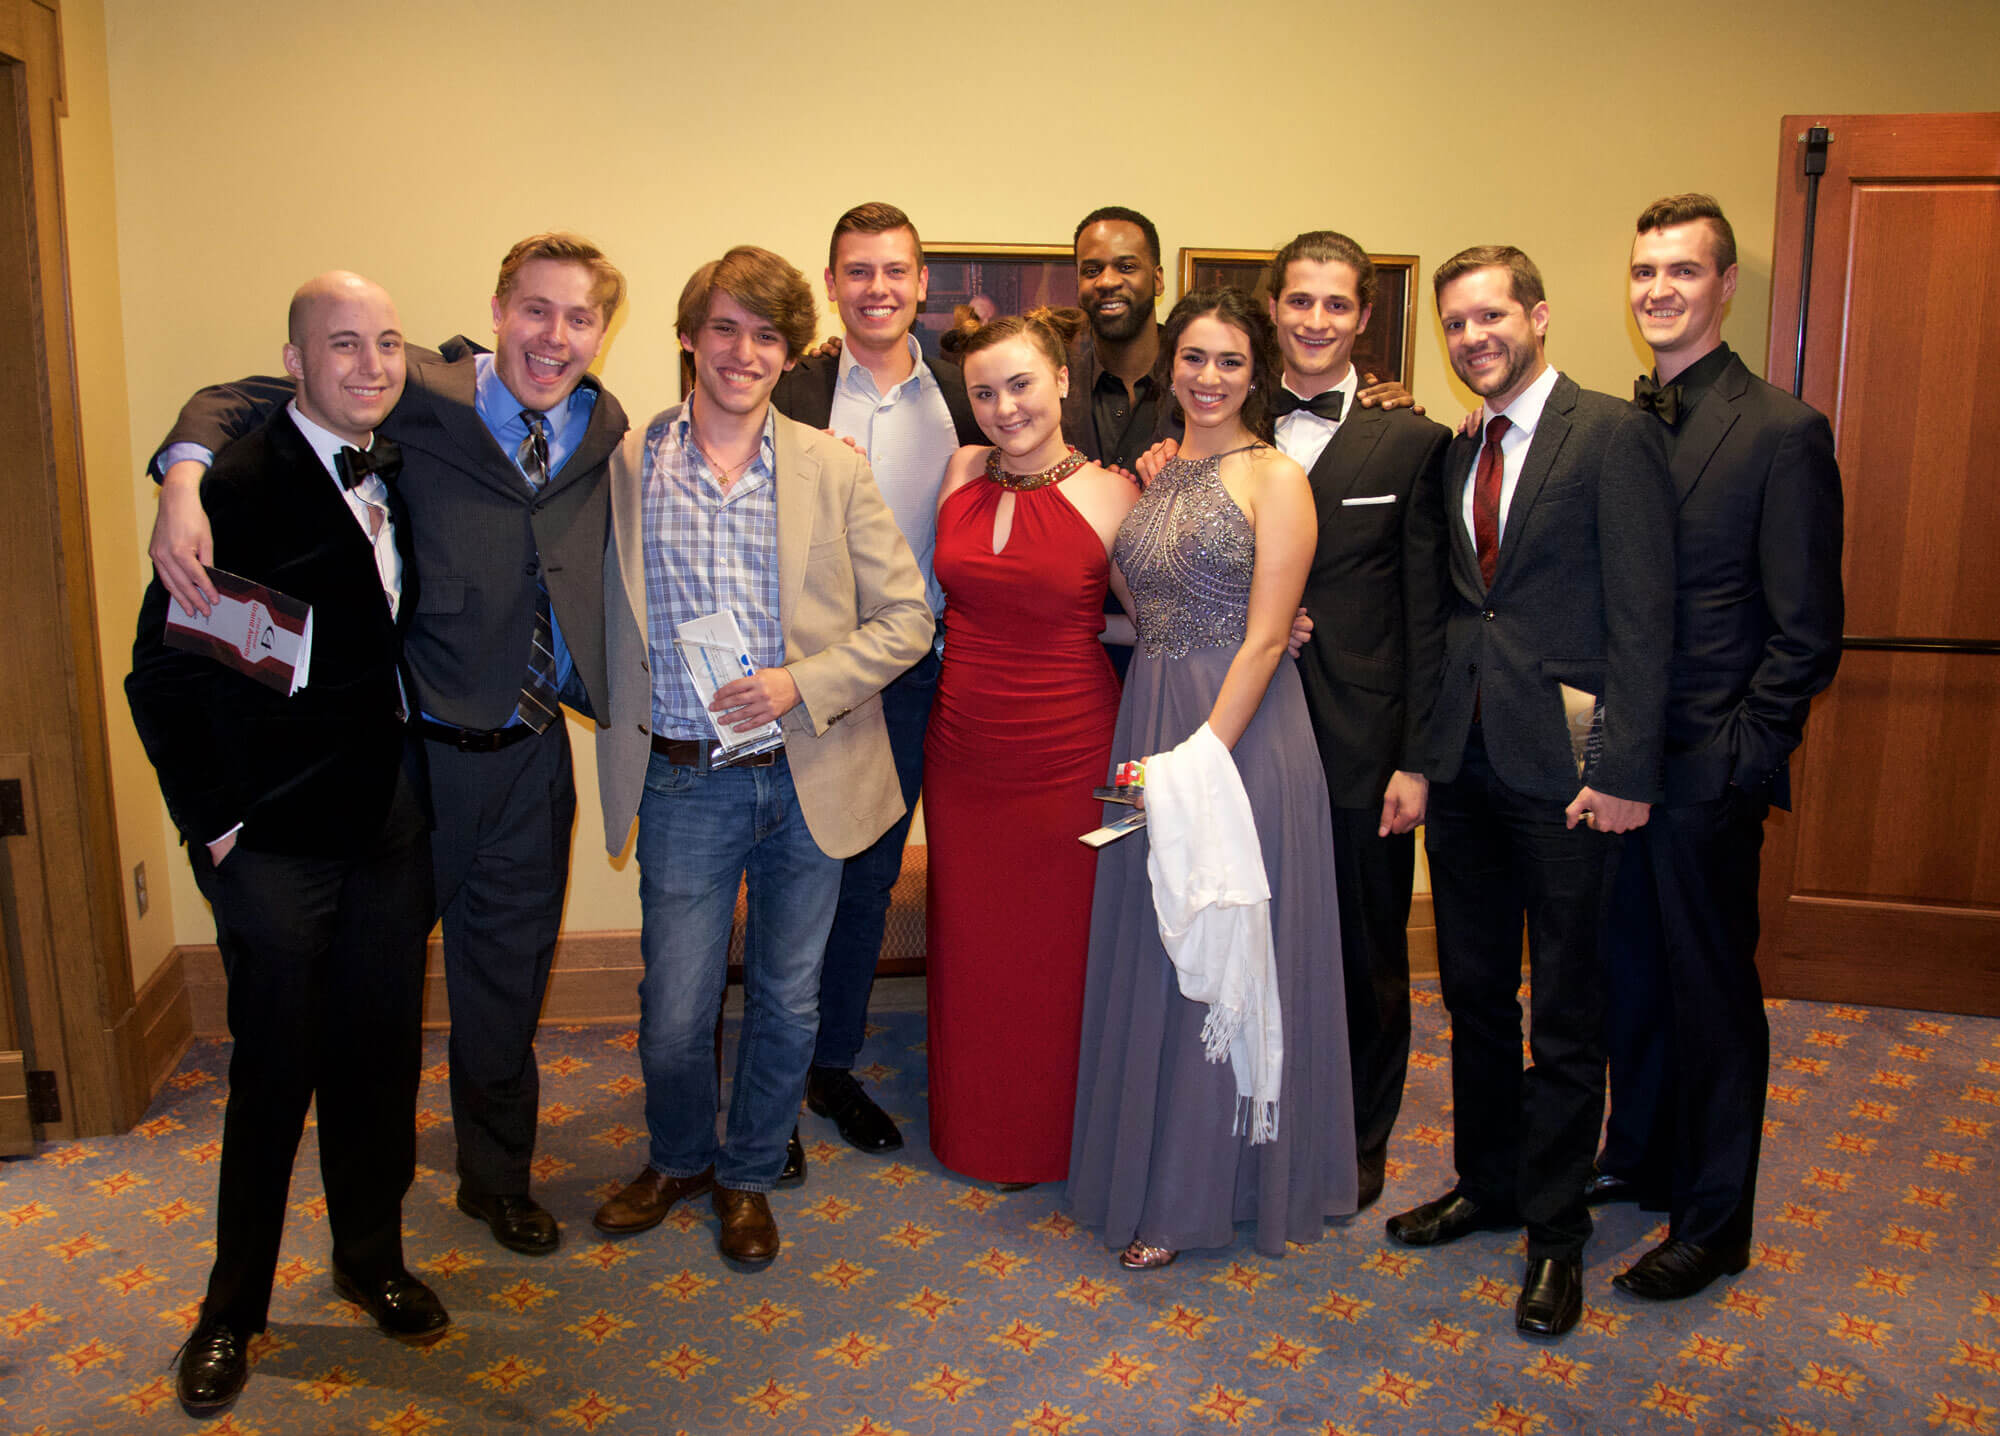 Members of the "Sweeney Todd" cast and crew pictured at the Grand Awards on October 8.